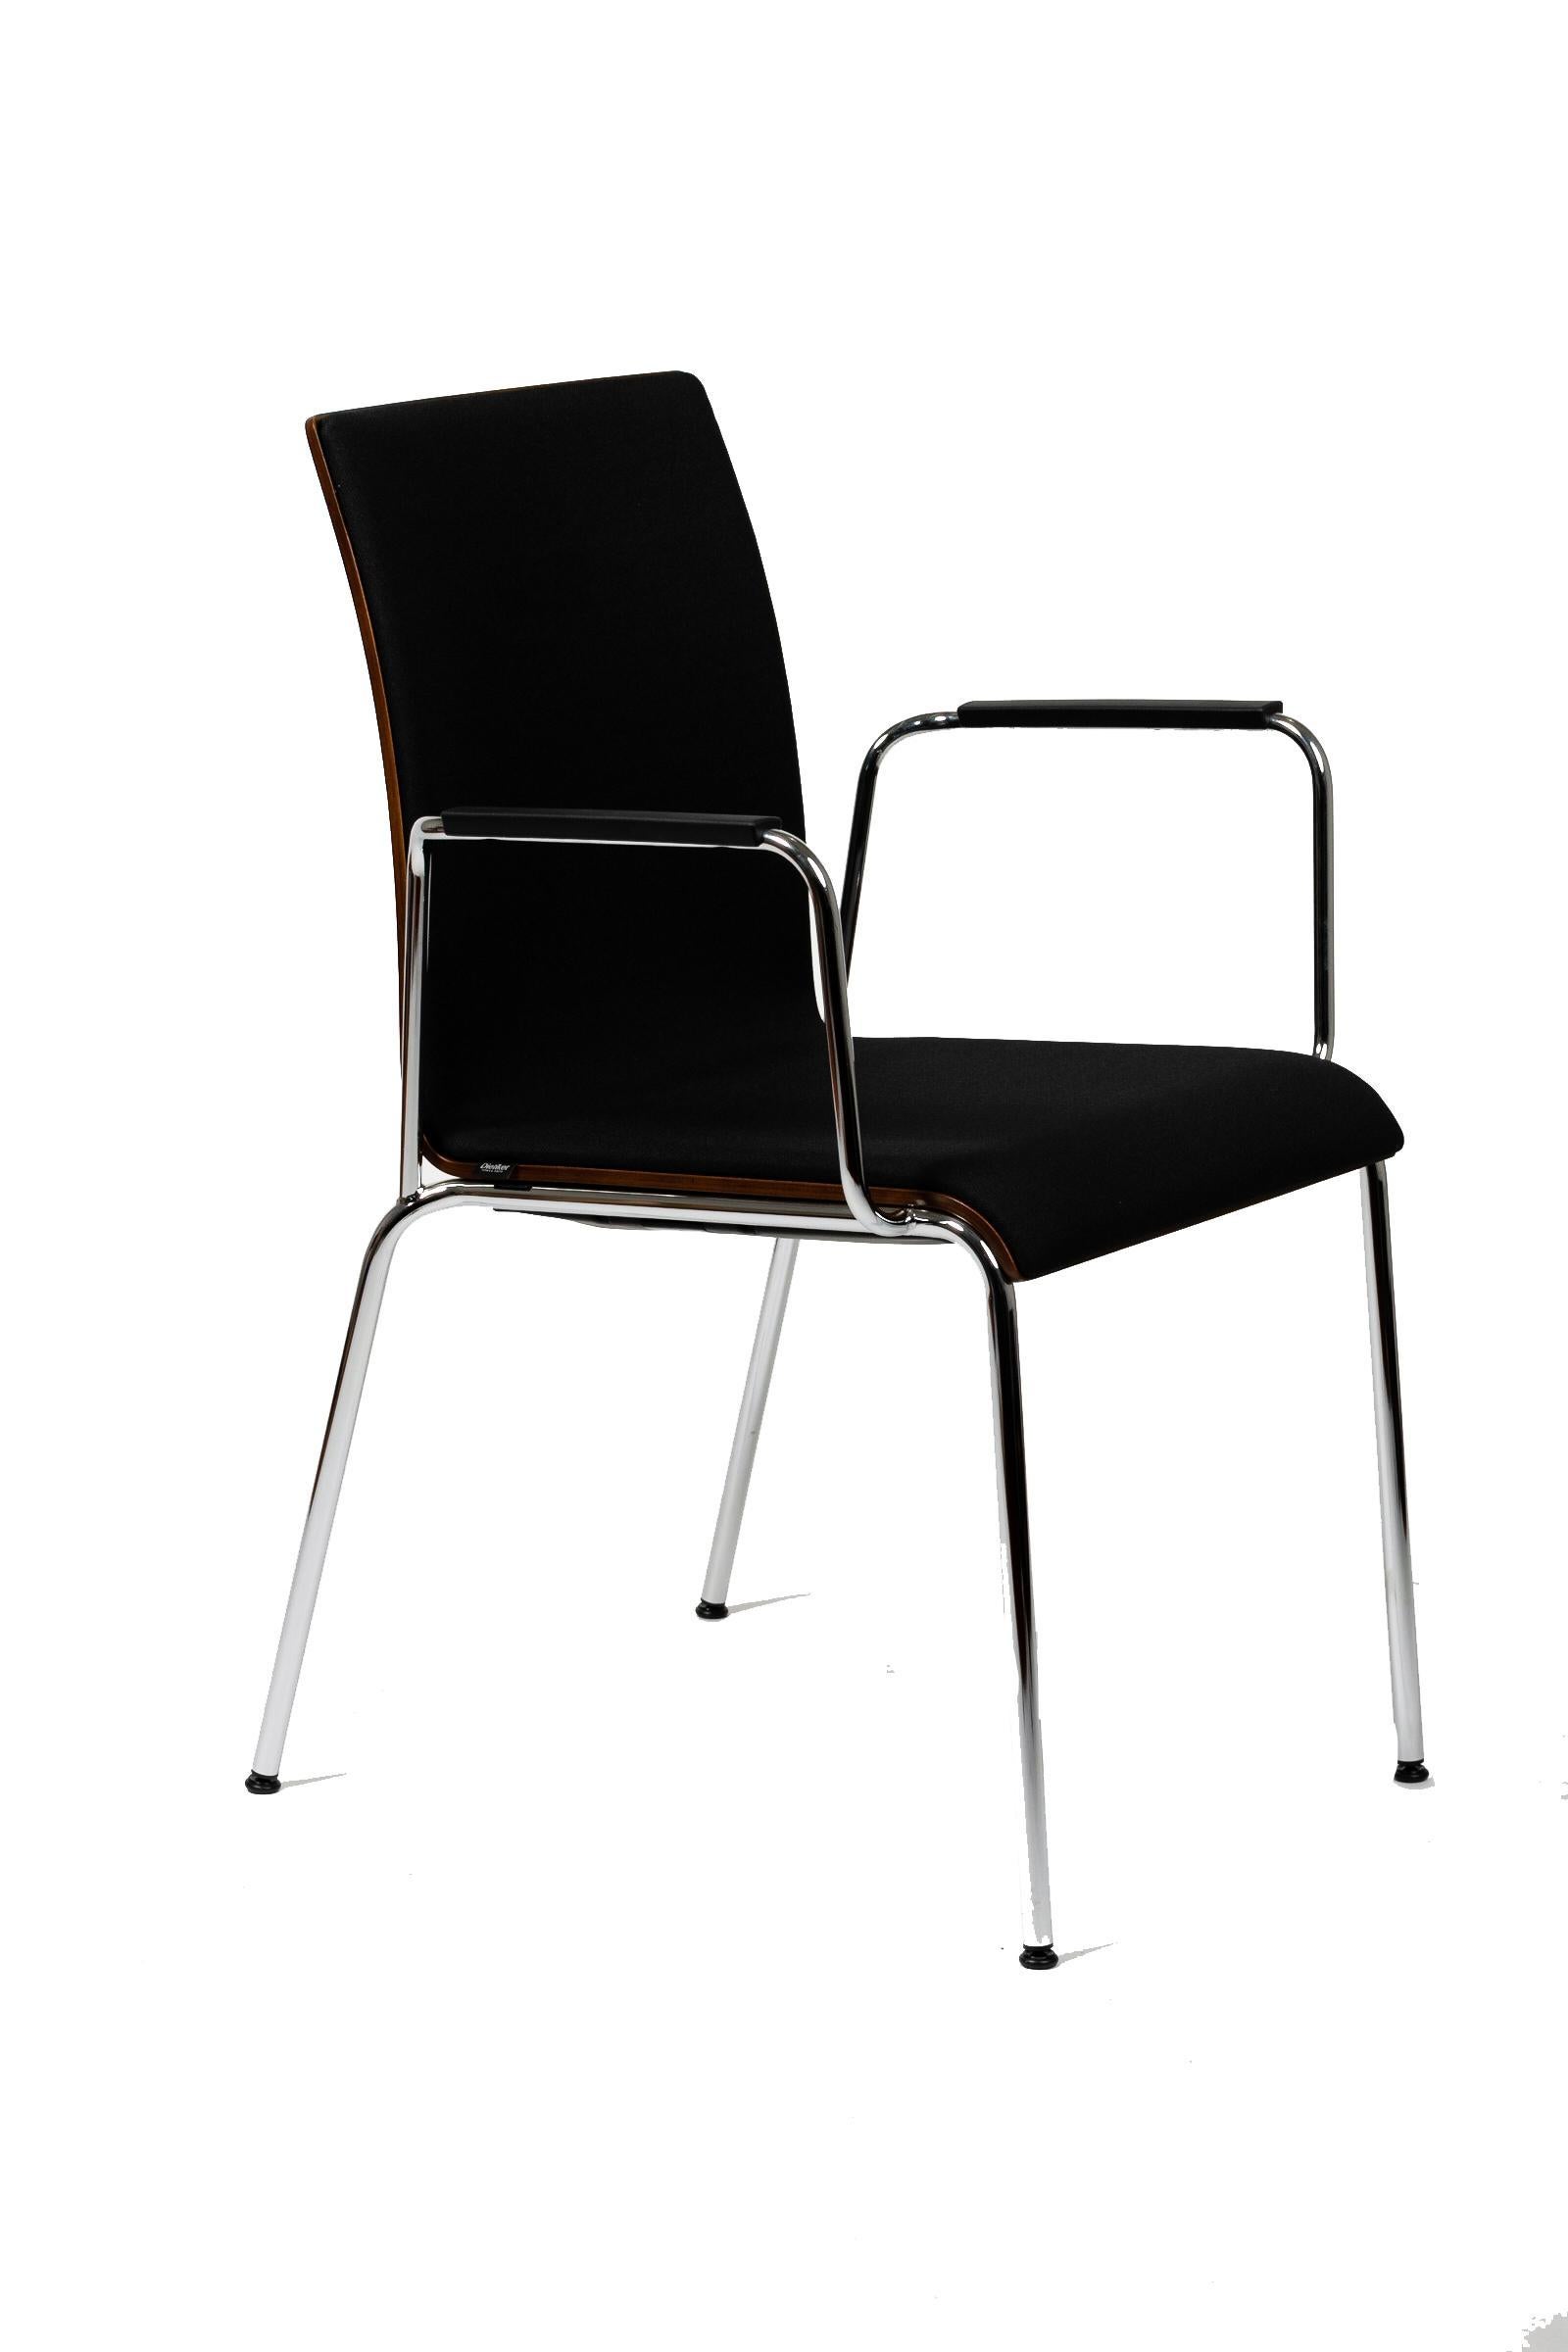 Minimalist Set of 2 Dietiker Poro L Swiss Chairs, Brown with Black Upholstery, in Stock